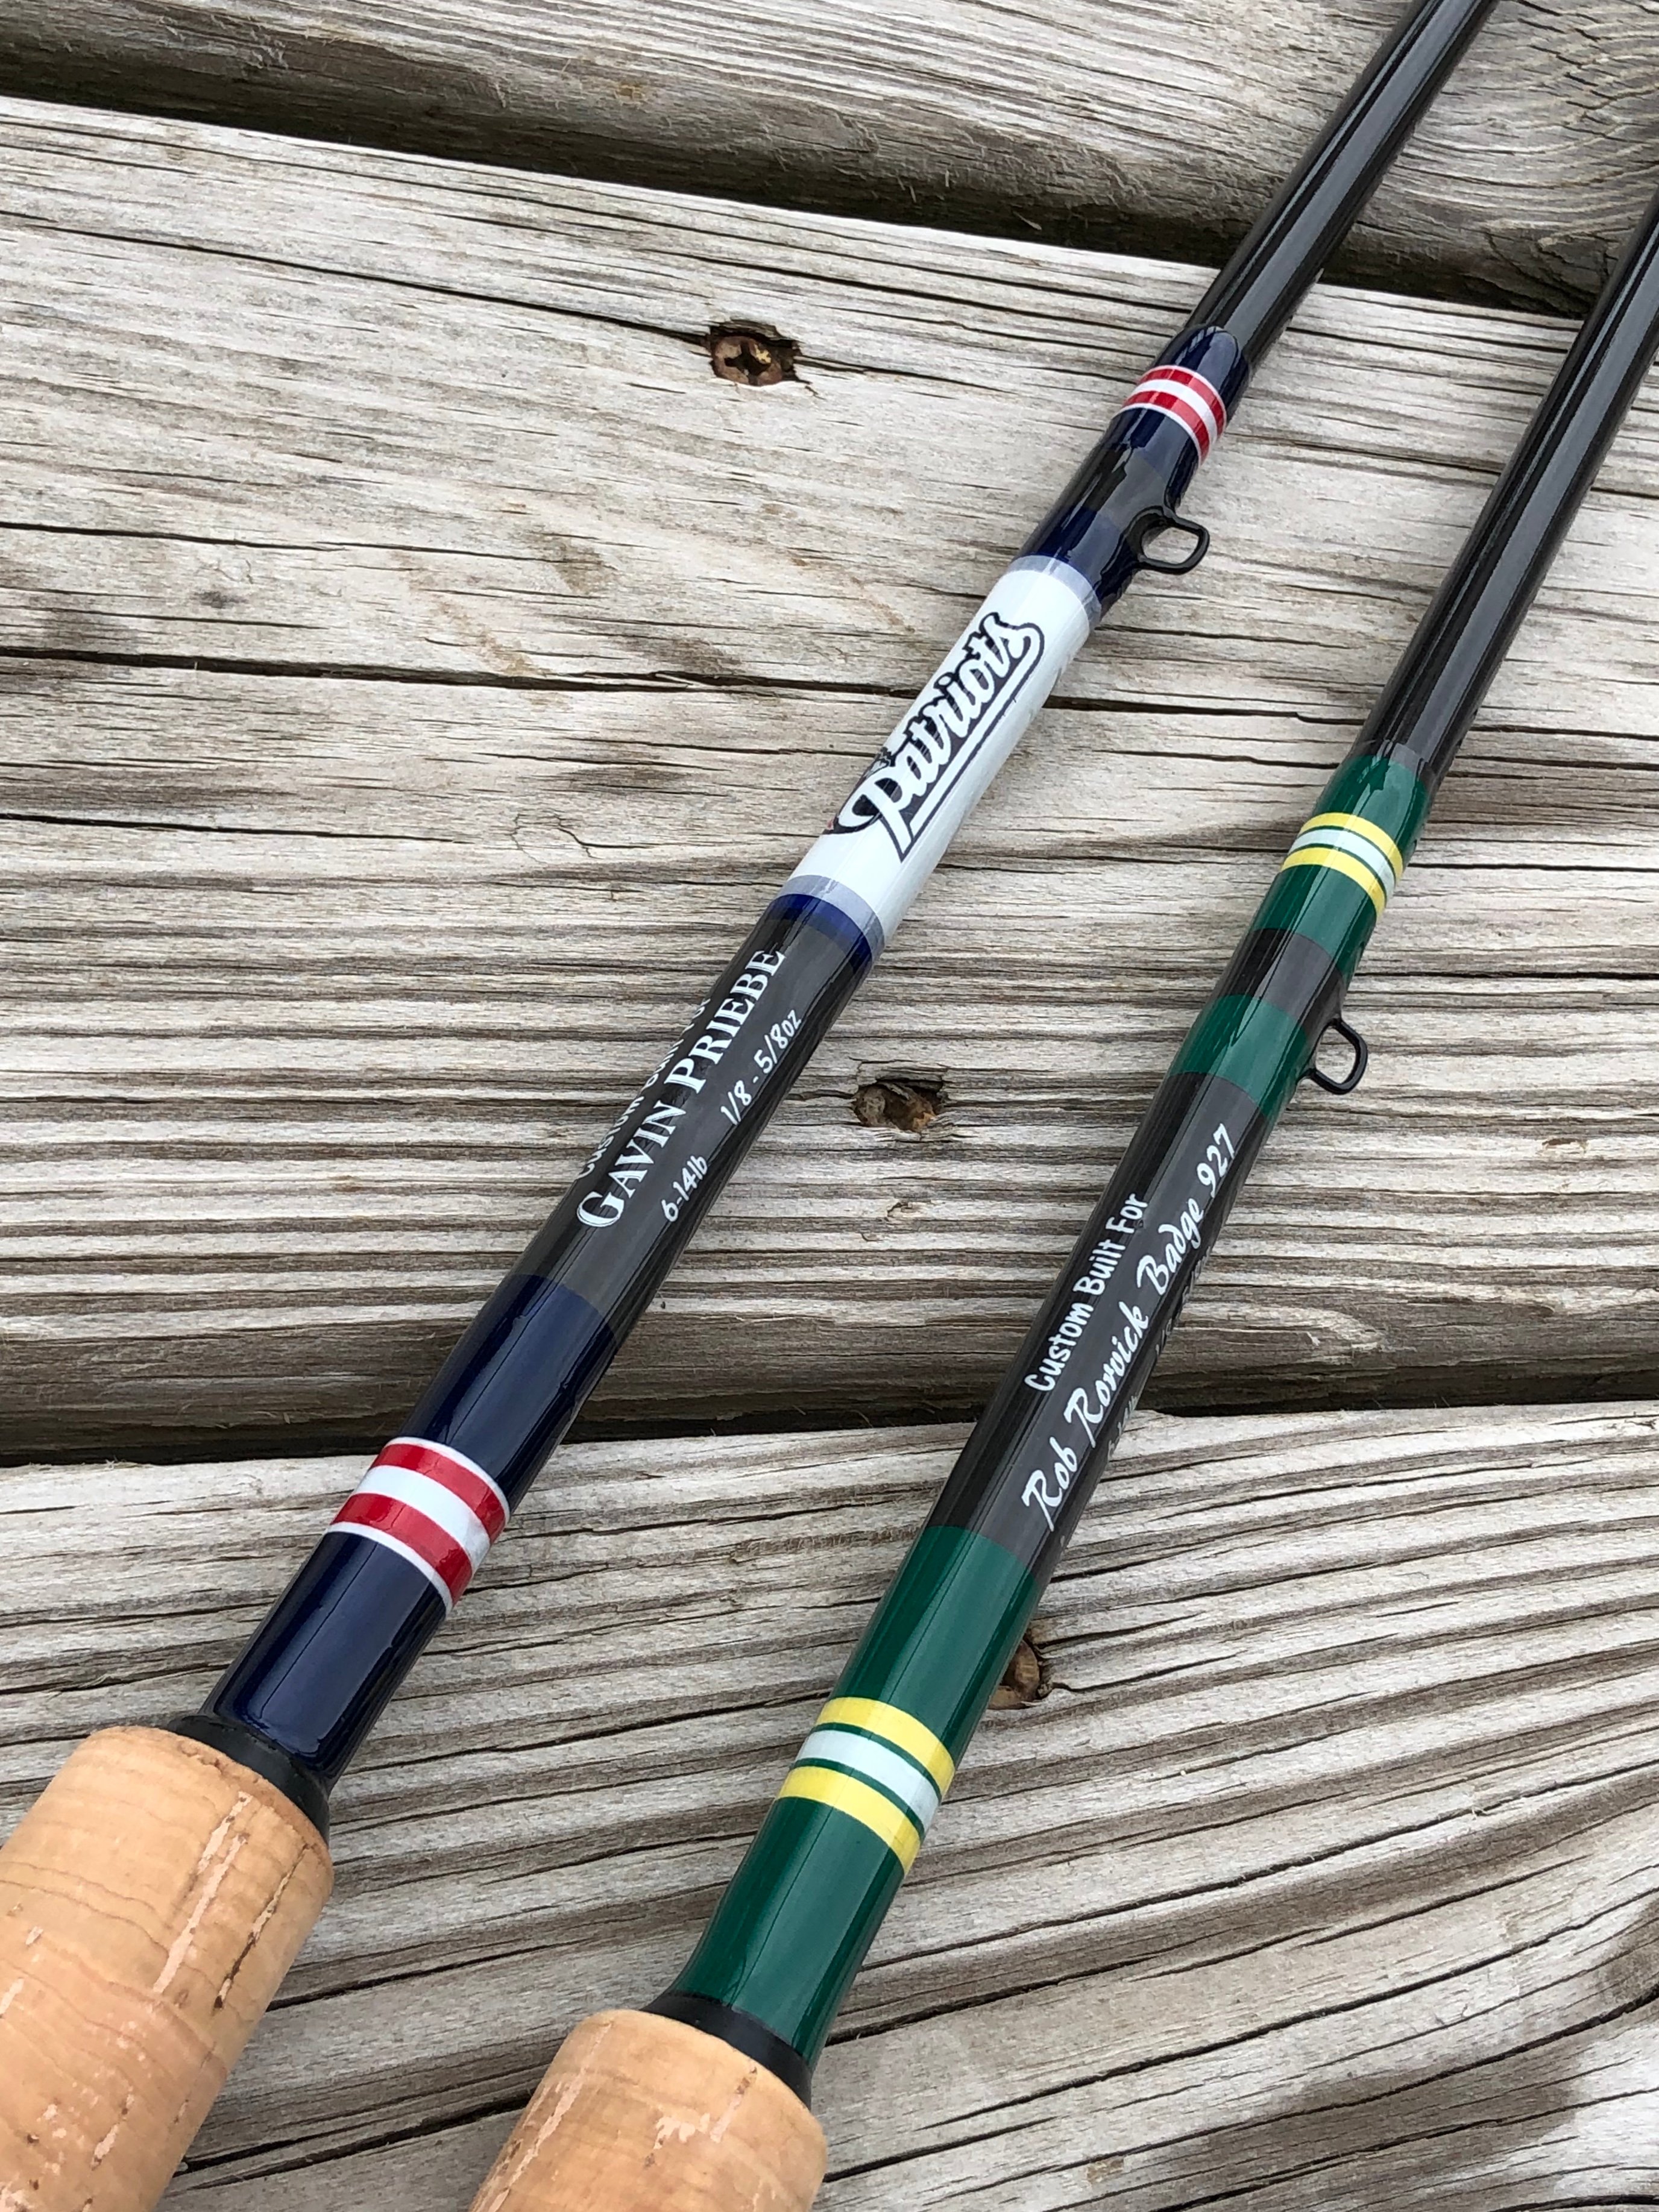 NFL Themed fishing rods - General Discussion Forum - General